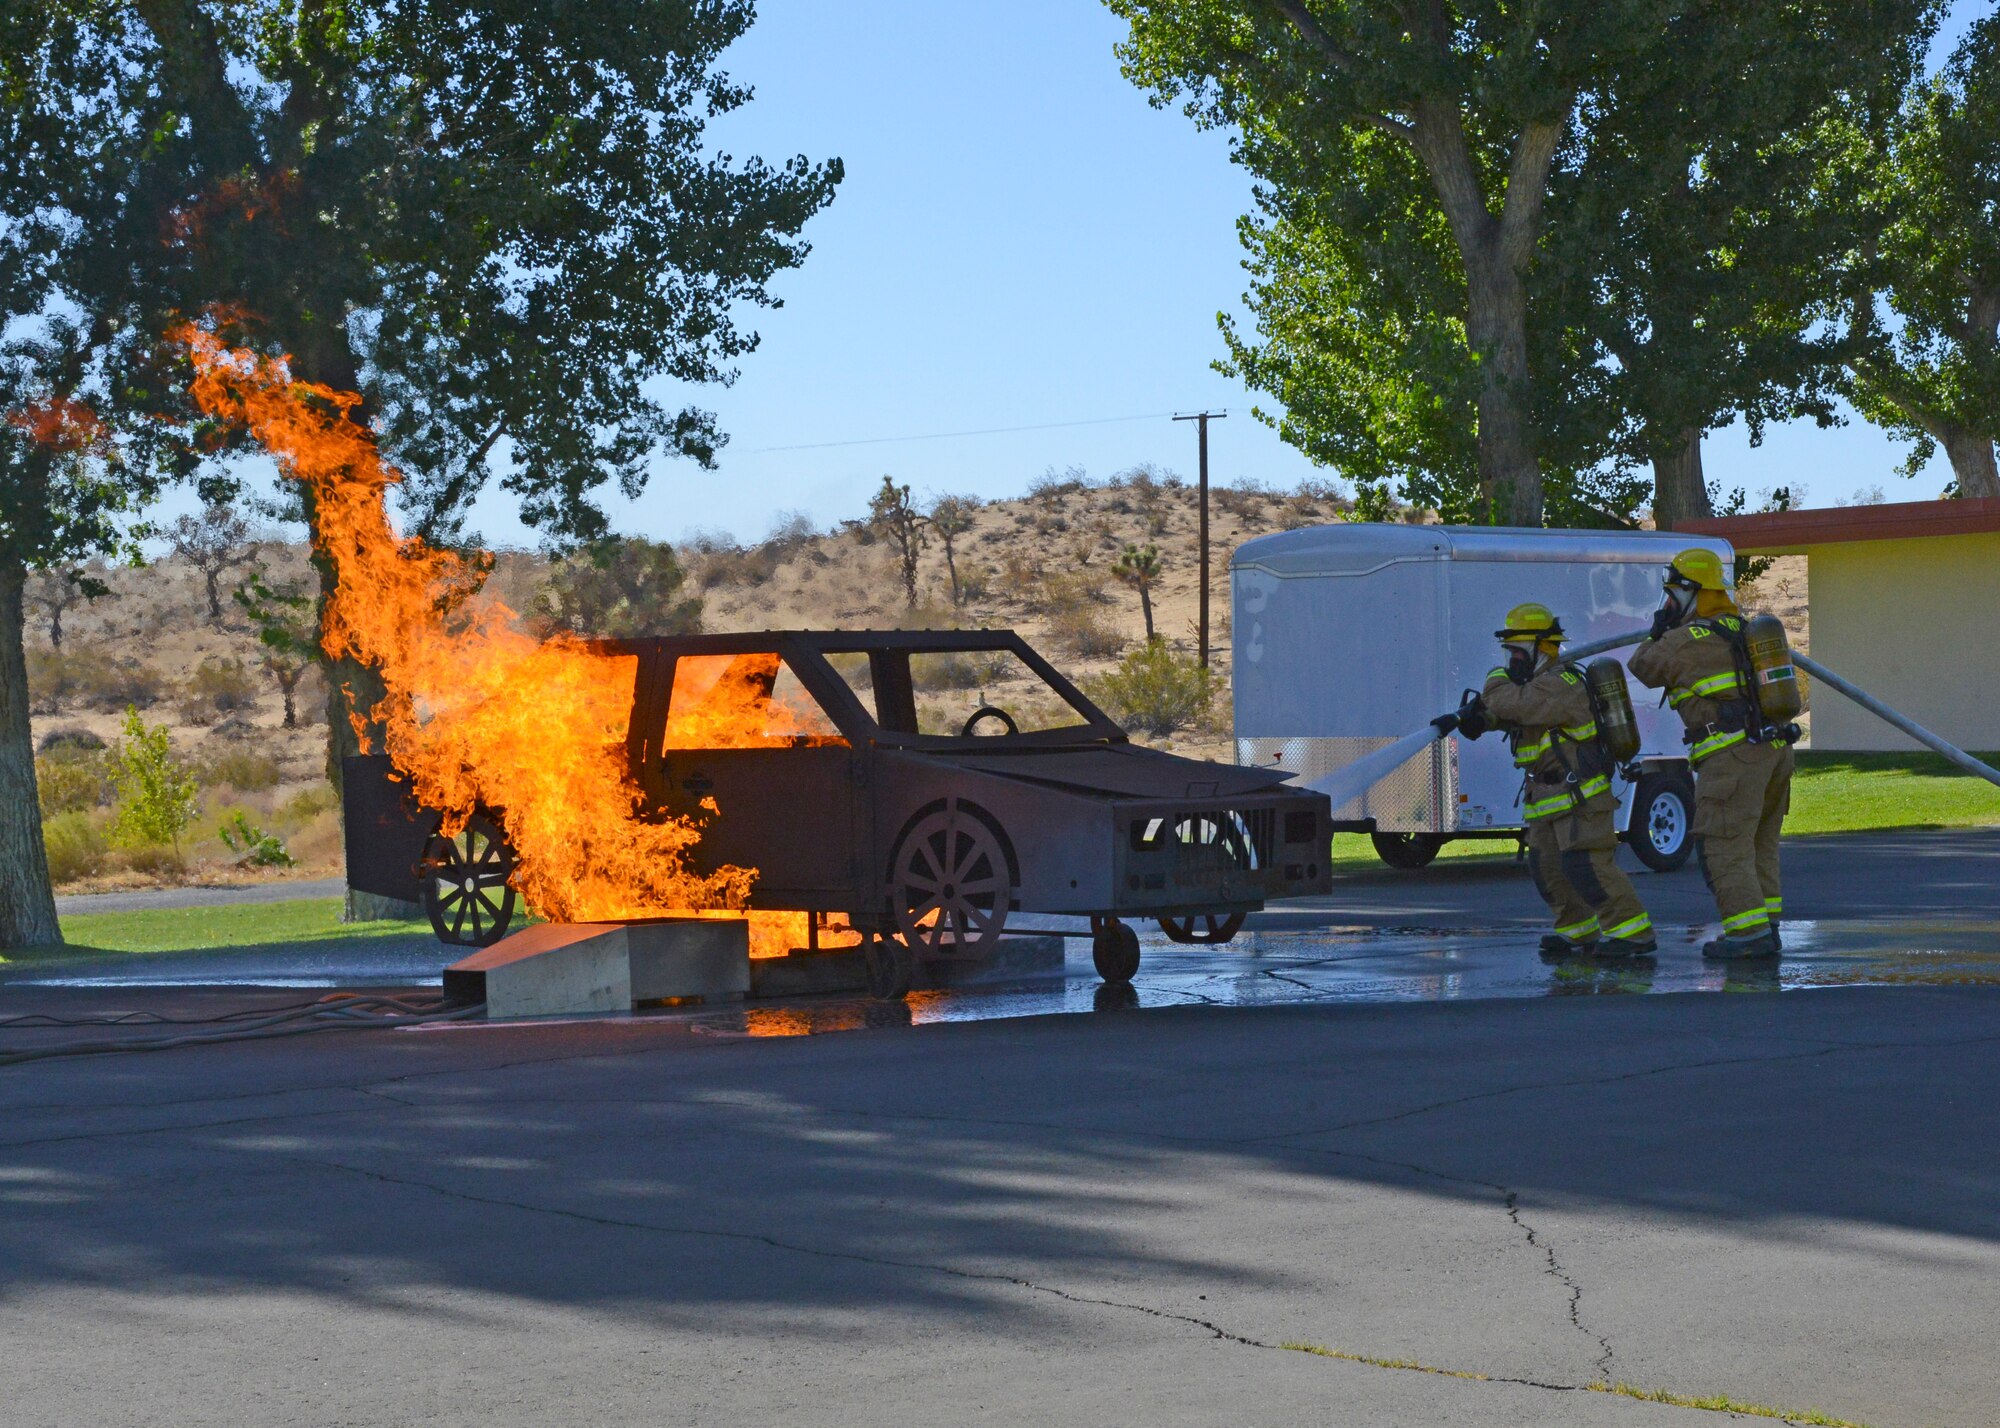 Edwards AFB fire fighters demonstrate how they would put out a car fire during an open house at Fire Station #4 at the Air Force Research Laboratory Detachment 7, Oct. 11. (U.S. Air Force photo by Kenji Thuloweit)